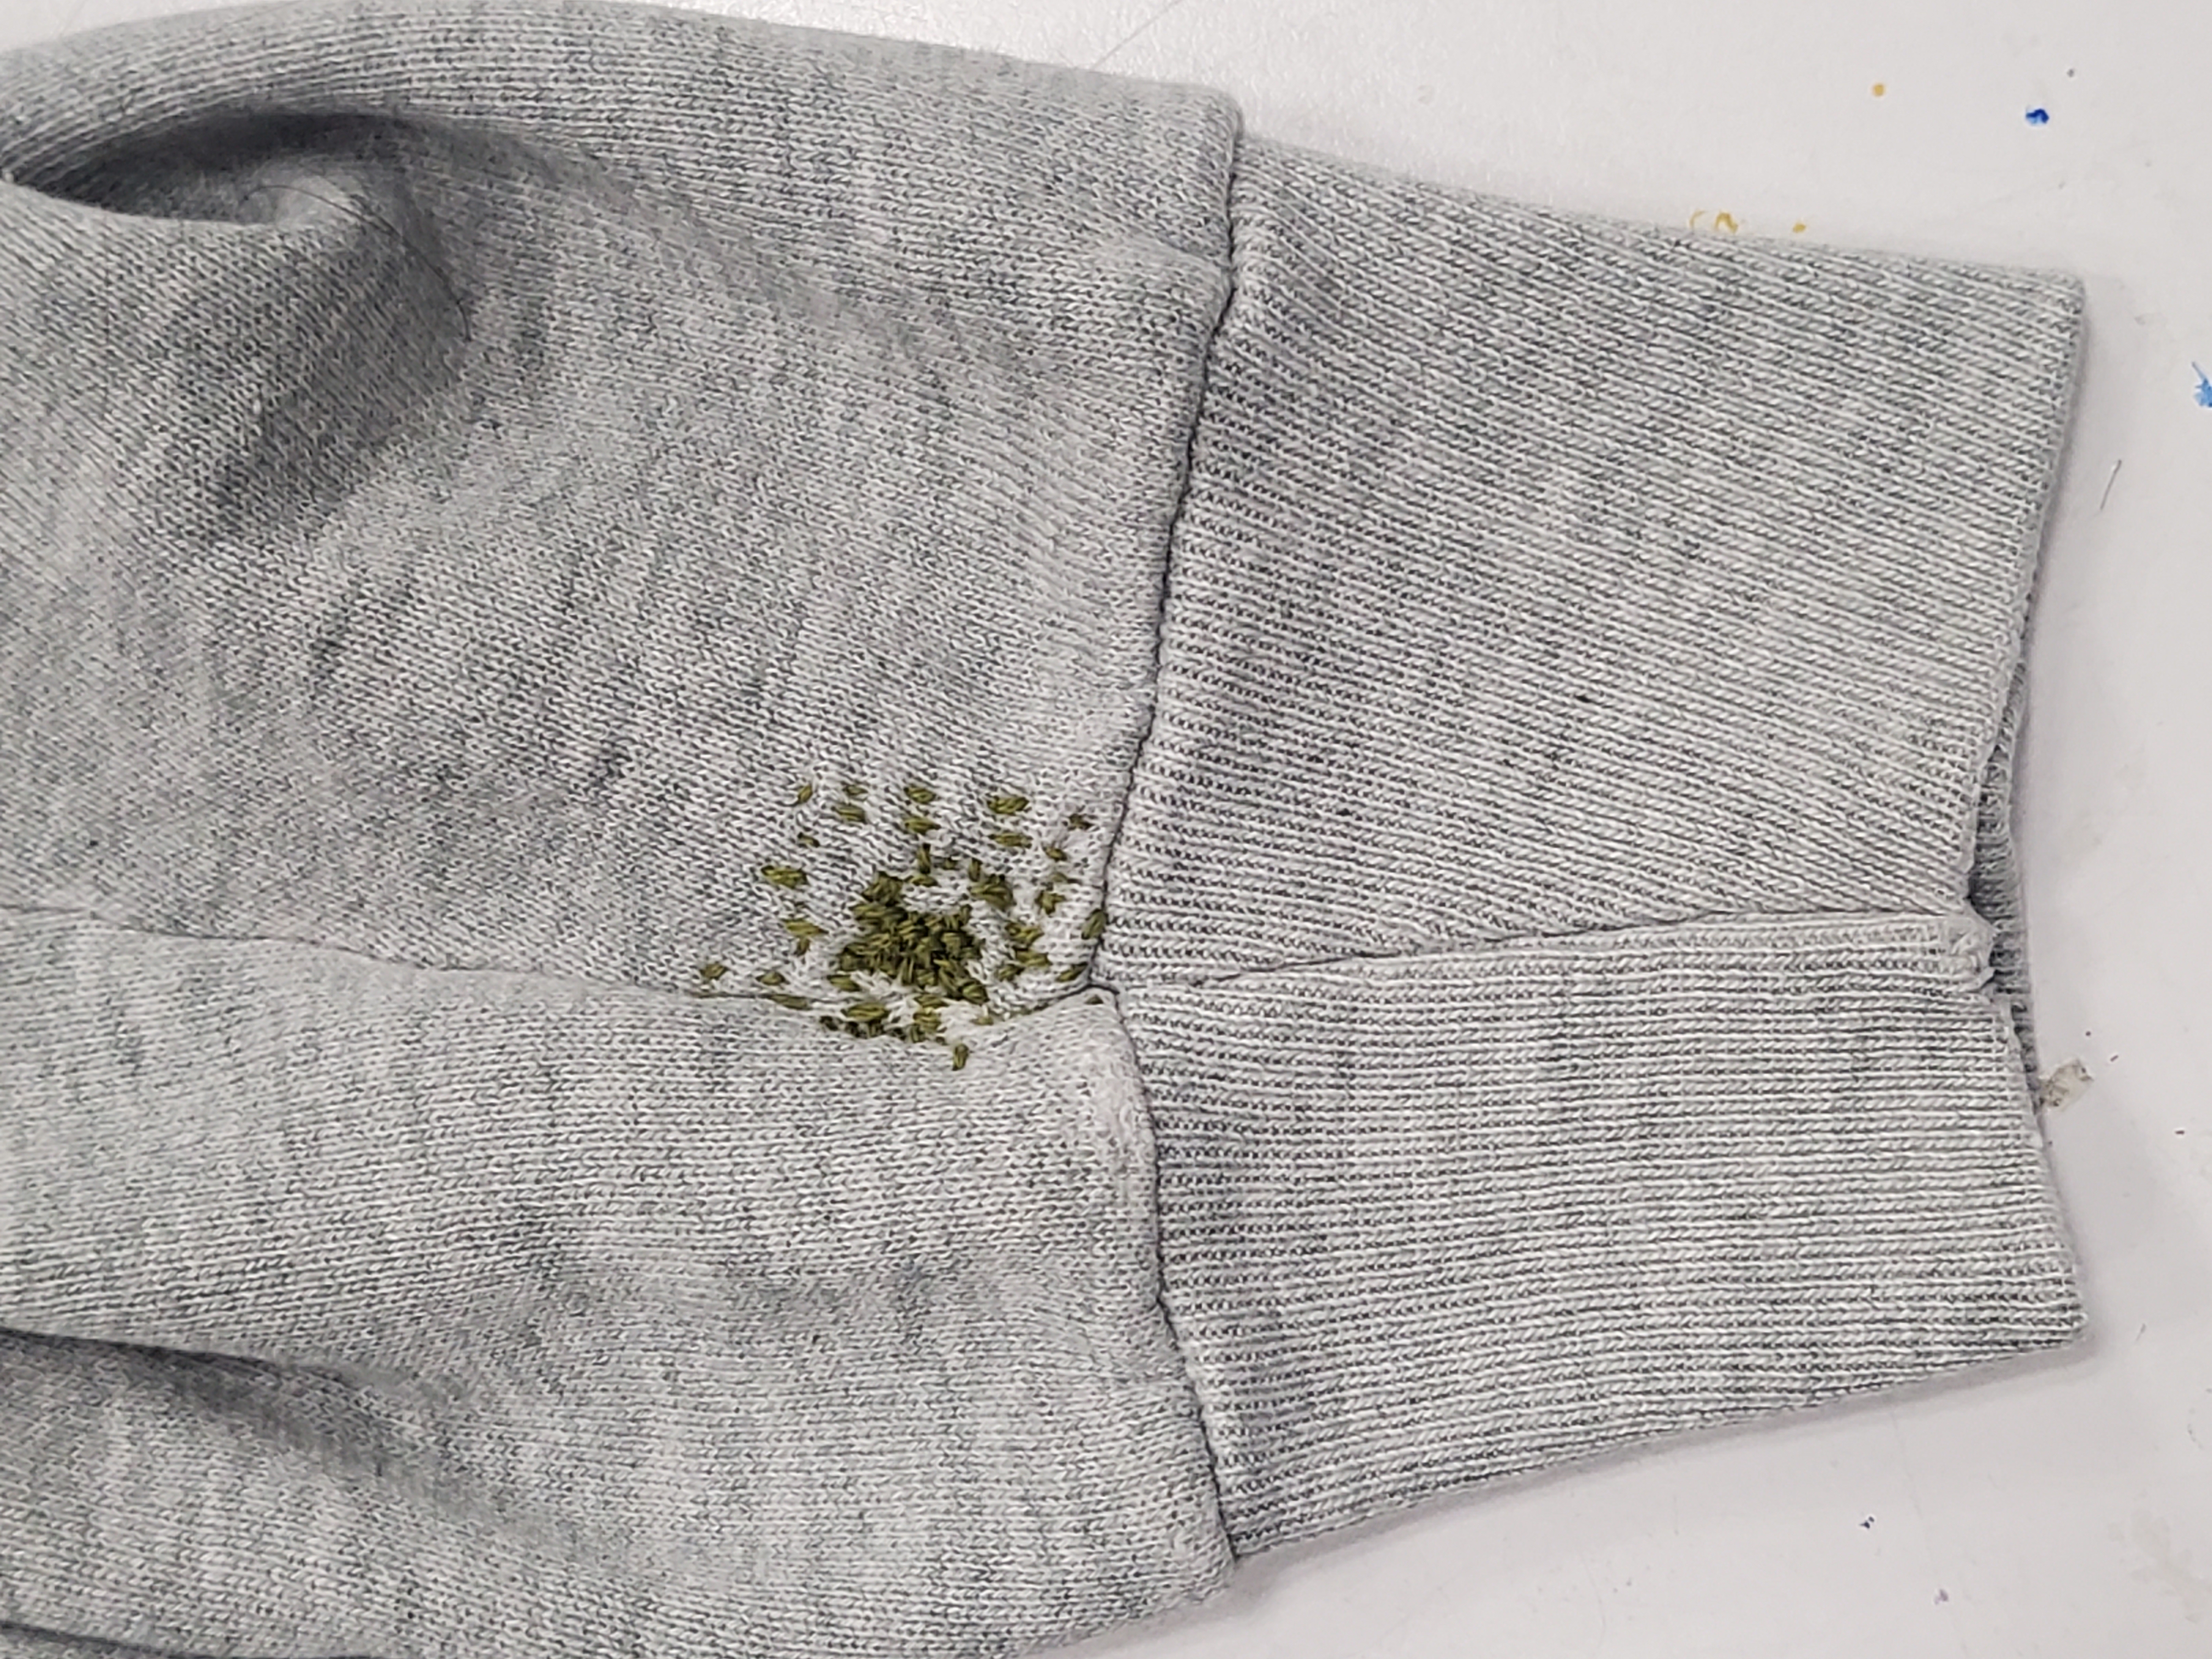 Grey hoodie sleeve with green stitches mended over a hole